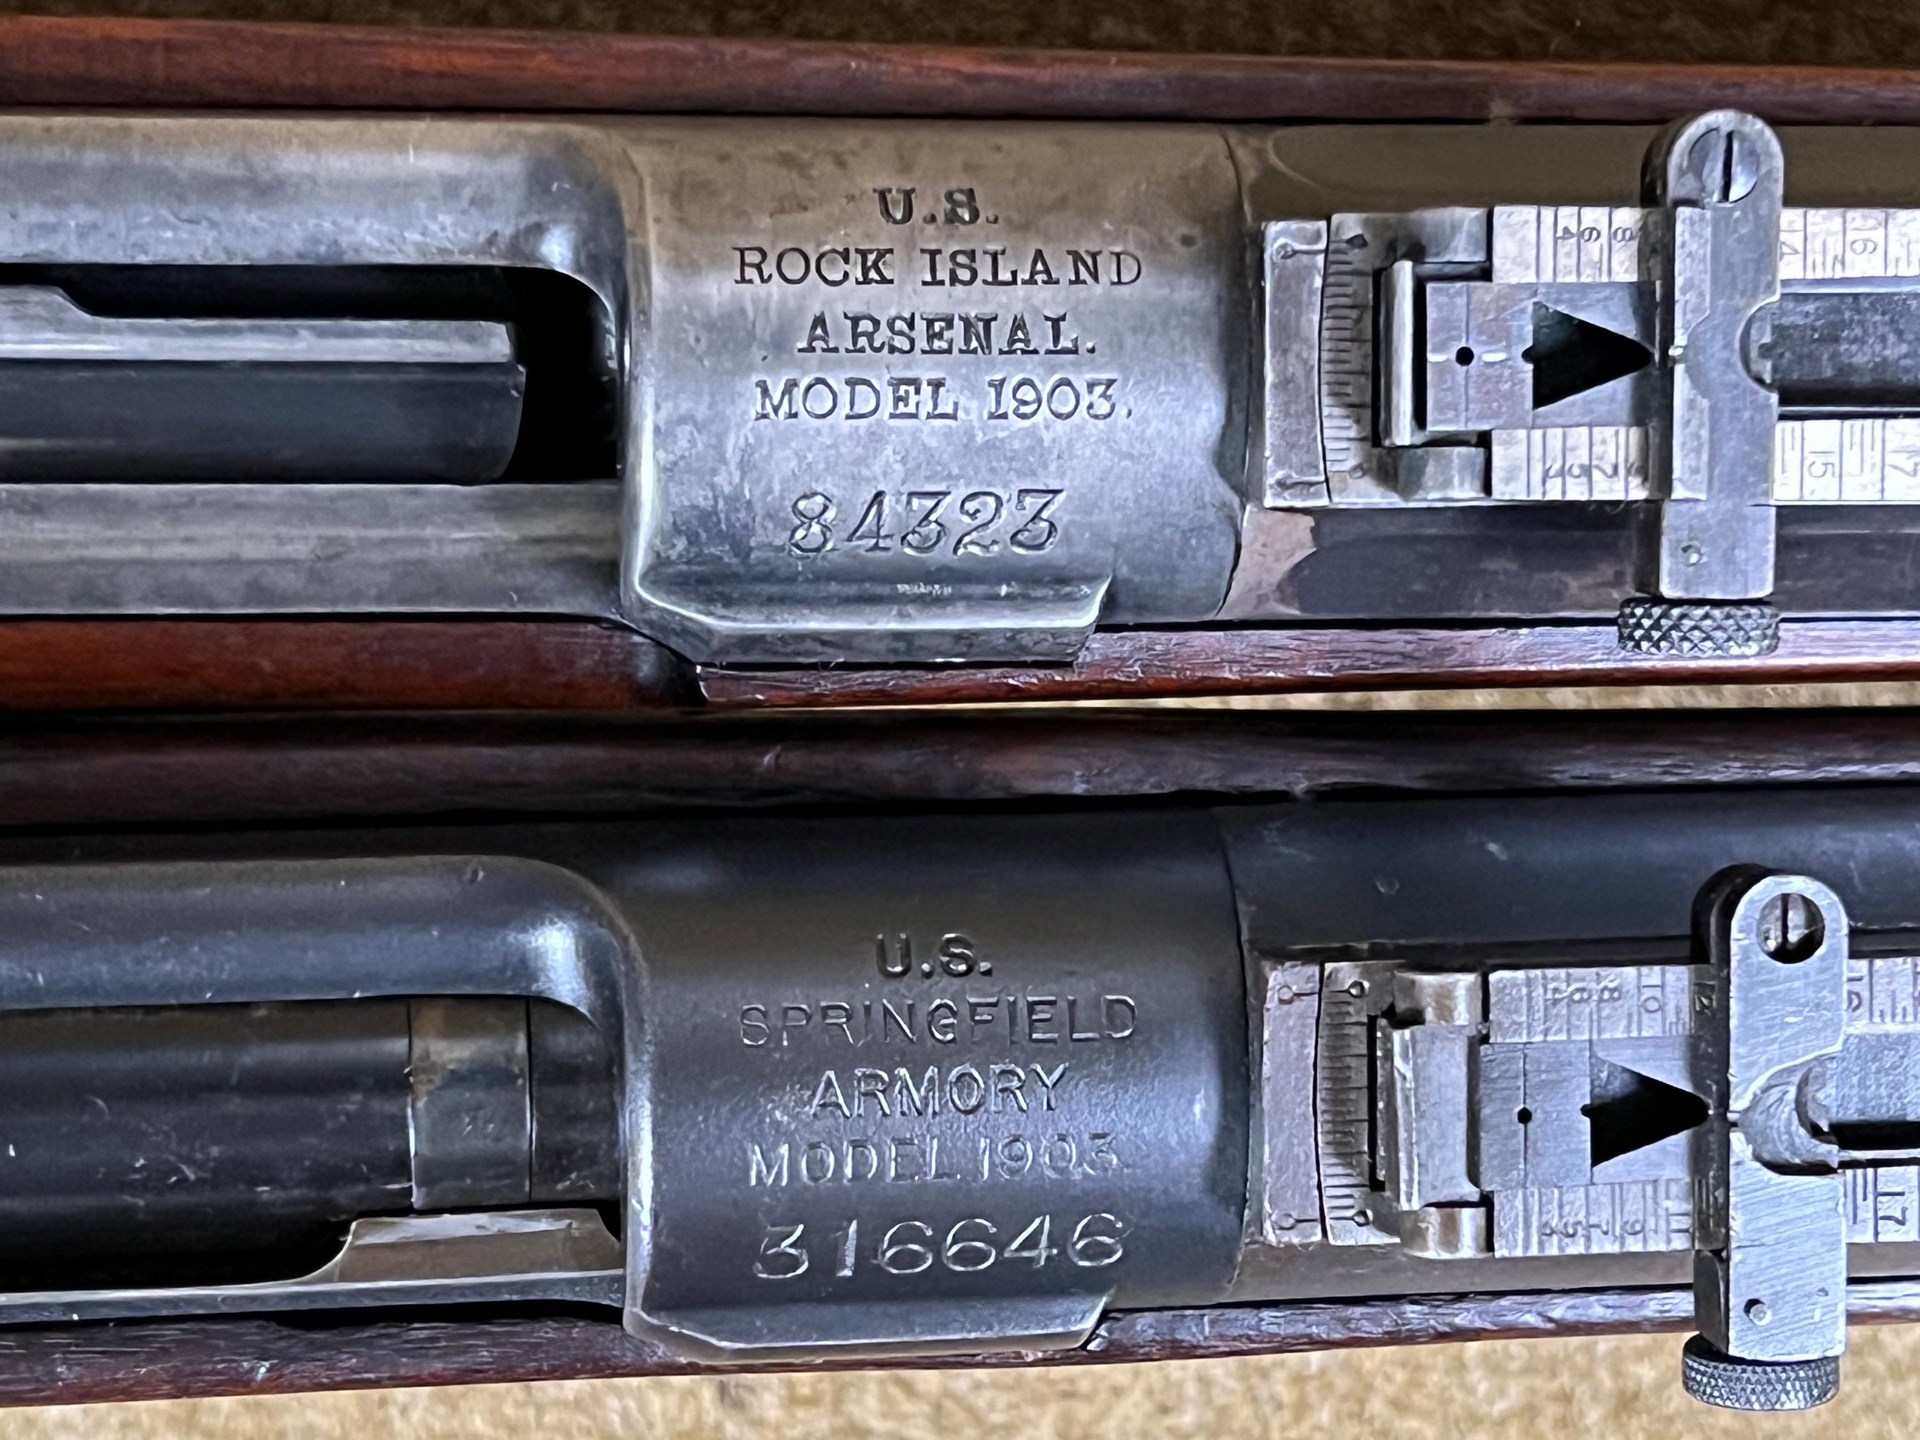 Rock Island Arsenal M1903 rifle receiver top and sprinfield armory m1905 rifle receiver below